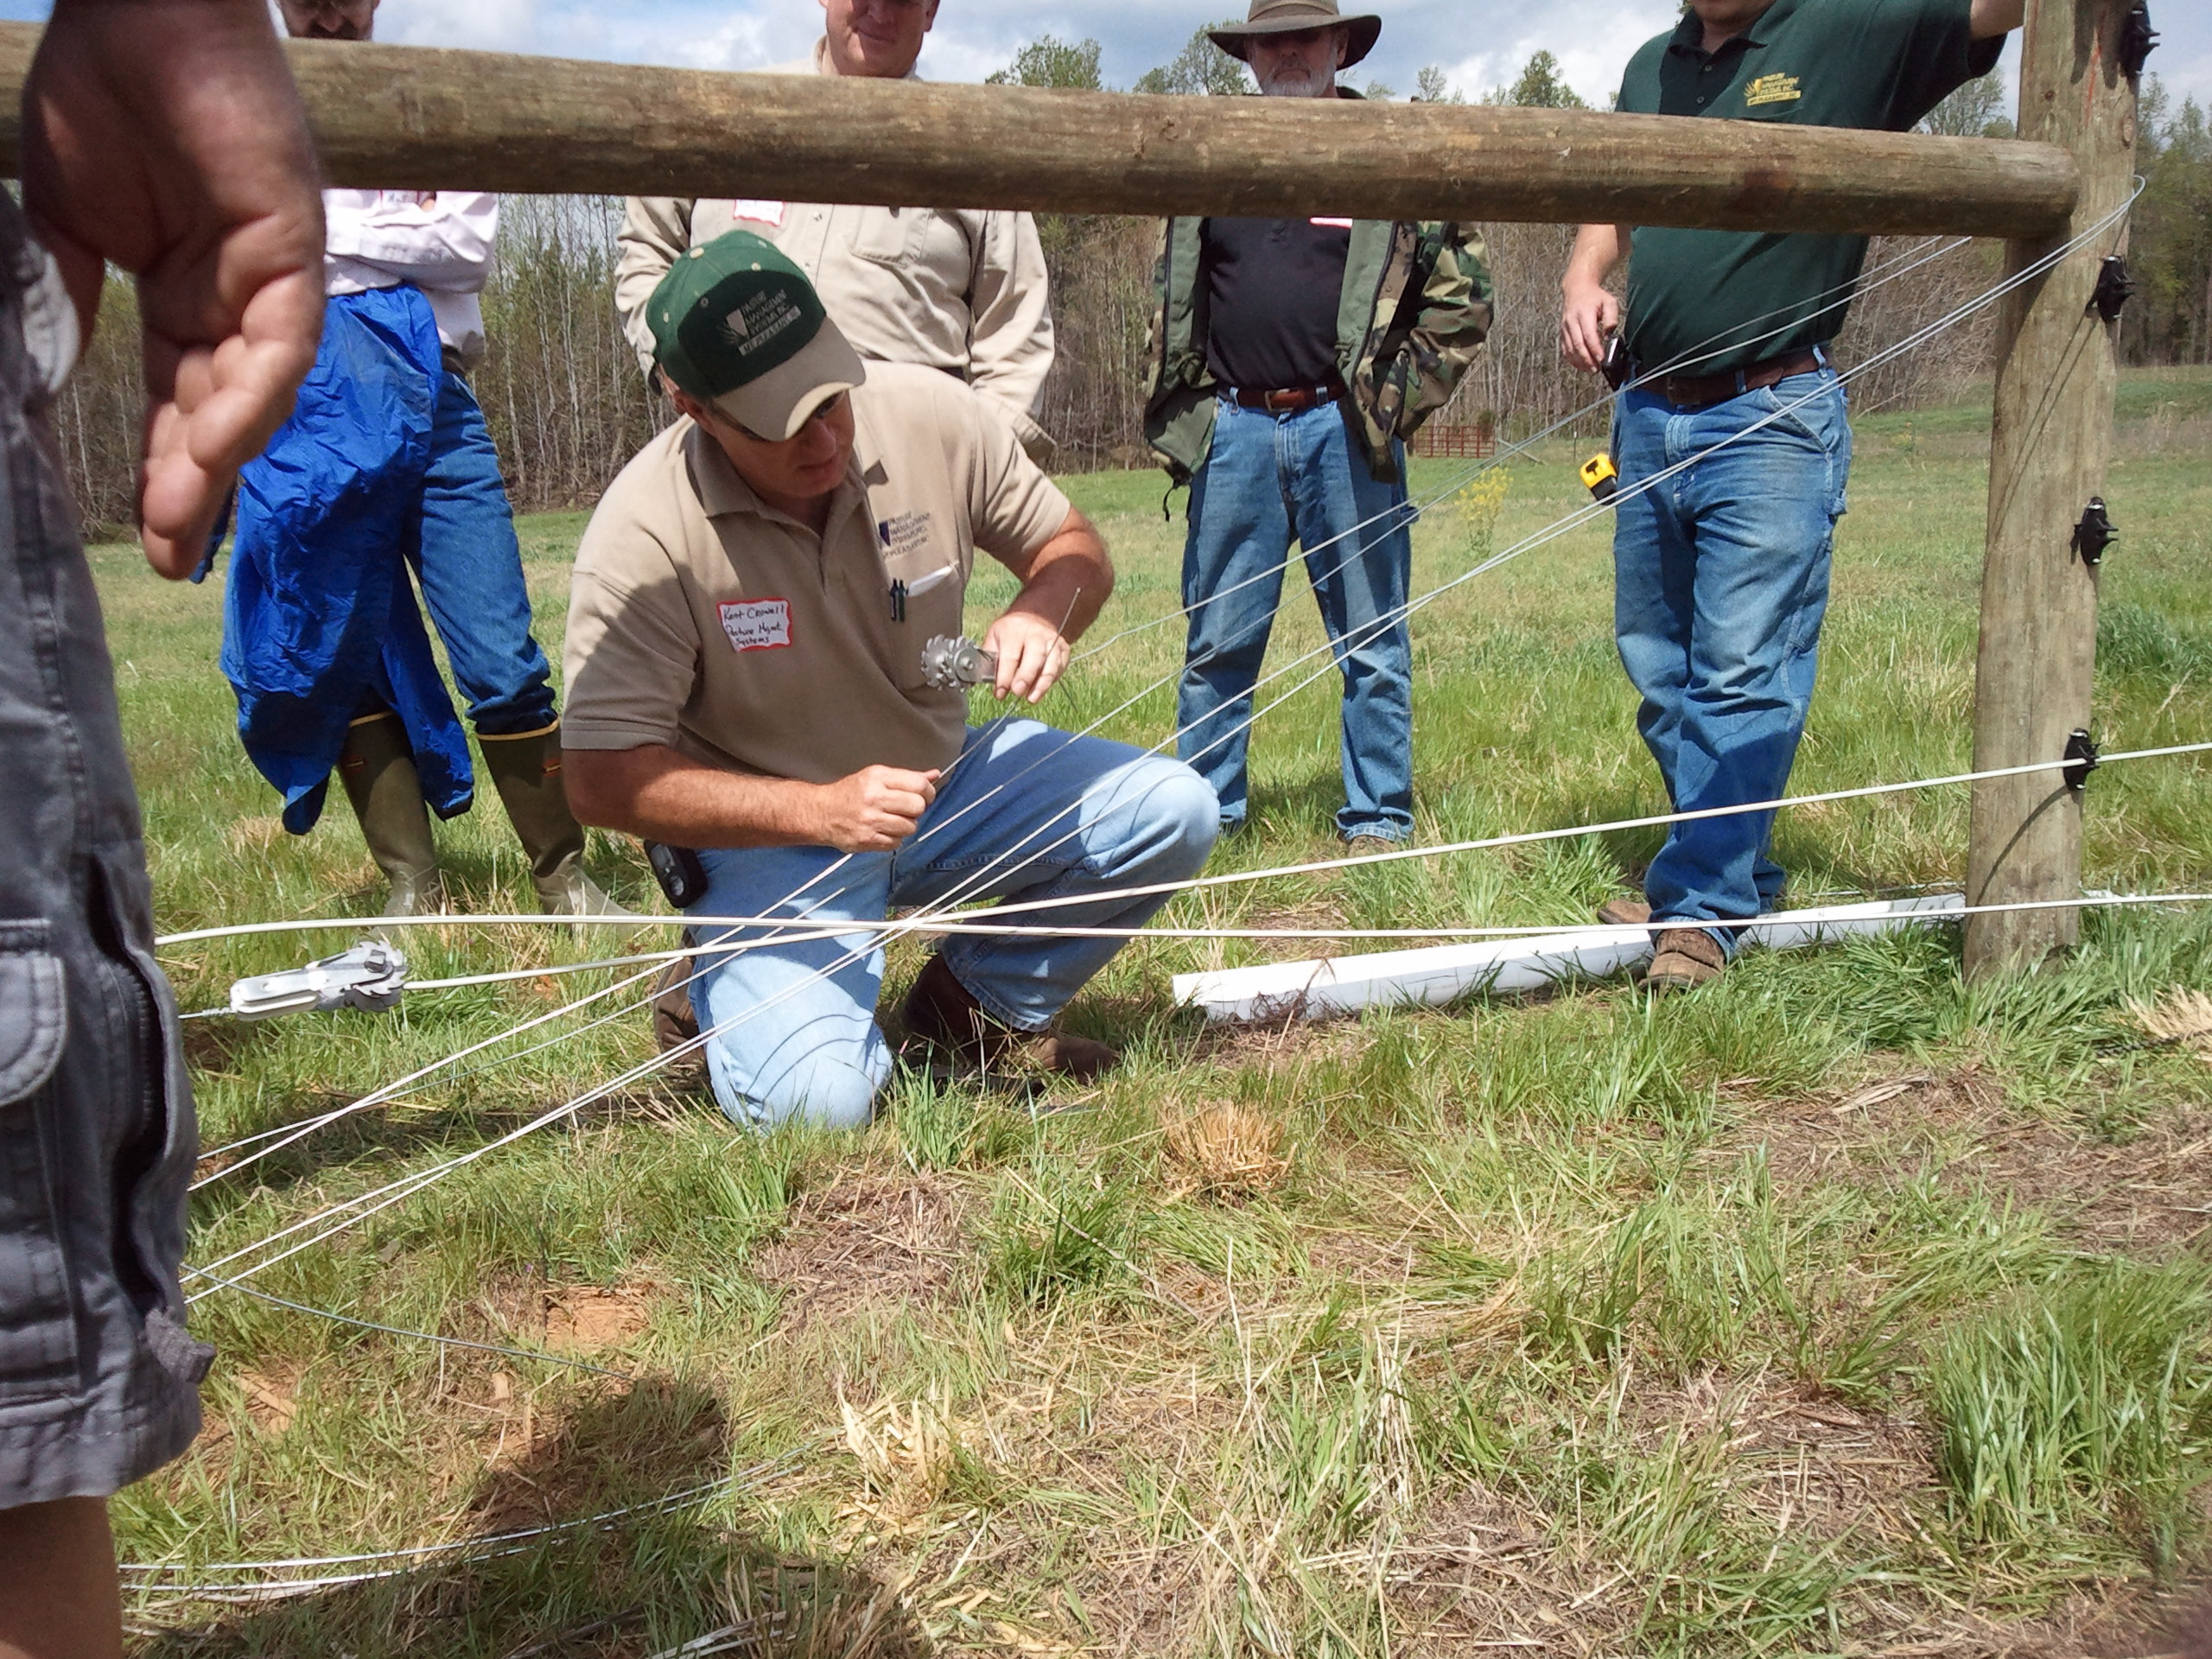 Man showing how to construct brace wire